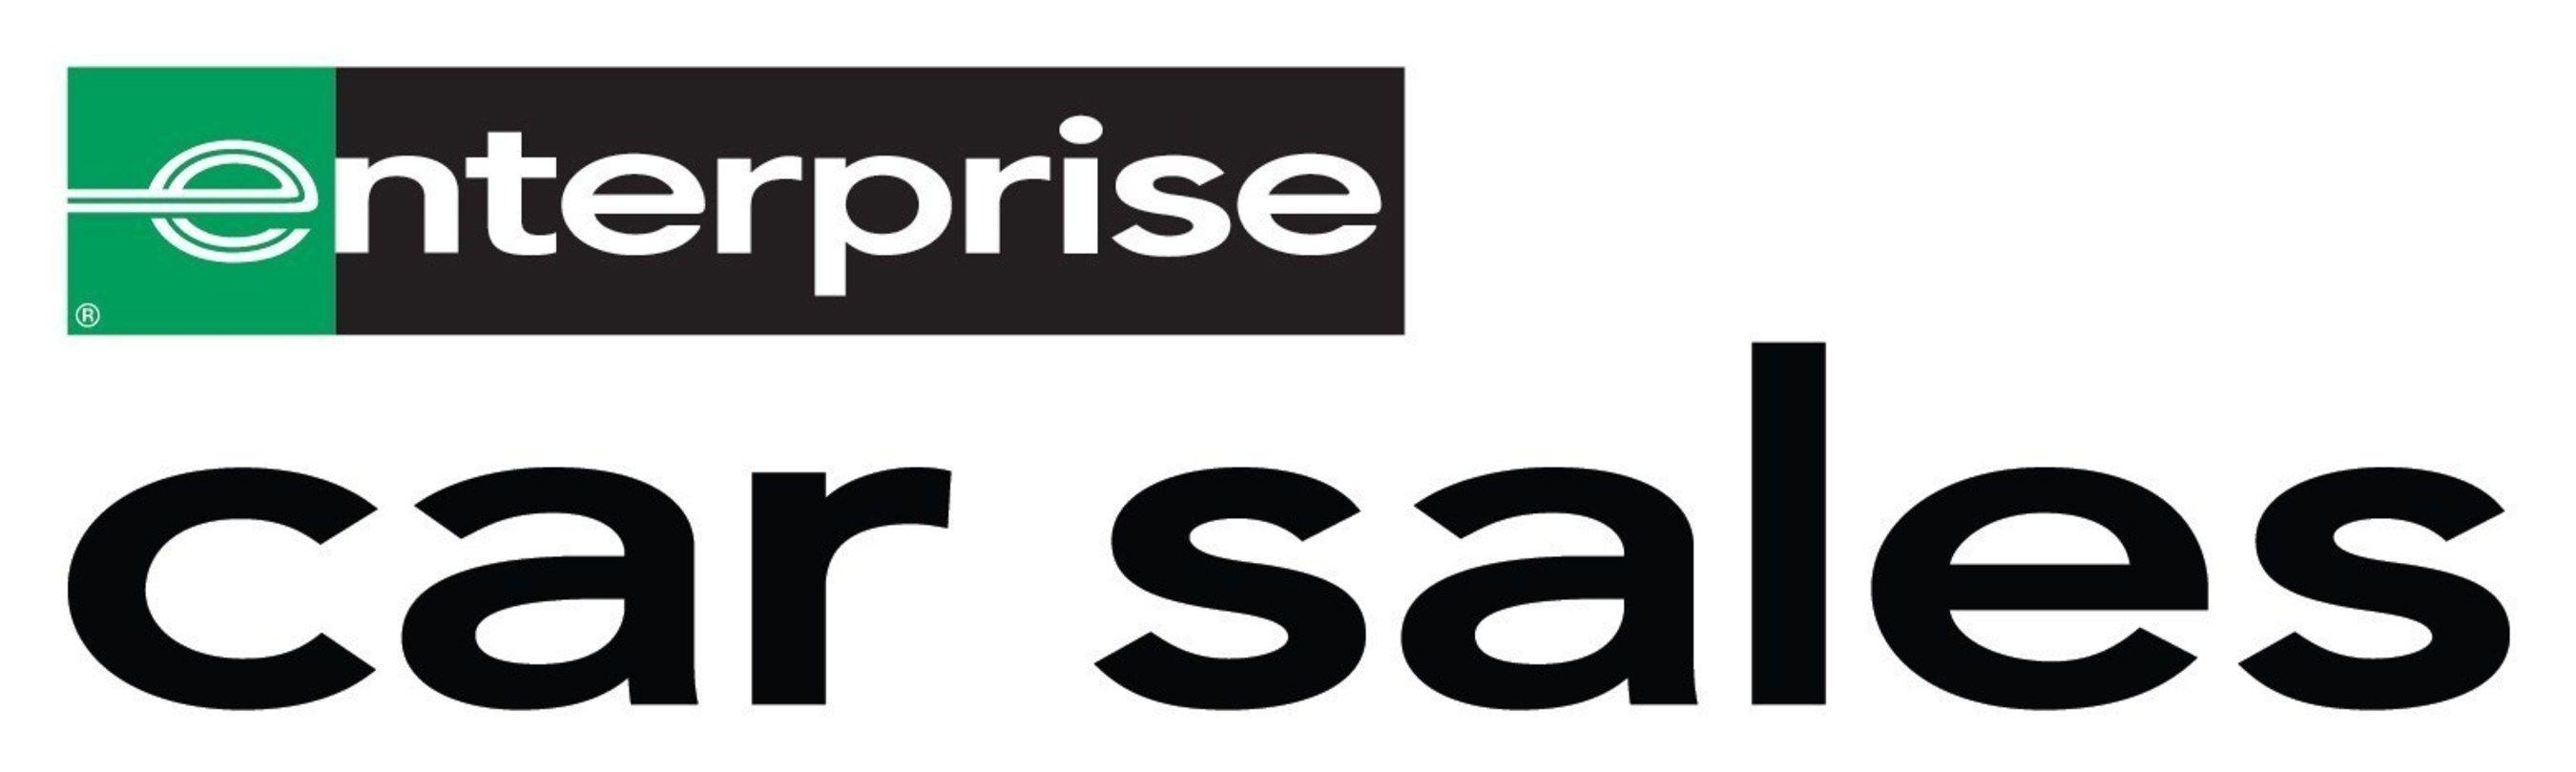 Enterprise Car Sales Logo - Enterprise Car Sales Secures Agreement with Navy Federal Credit Union